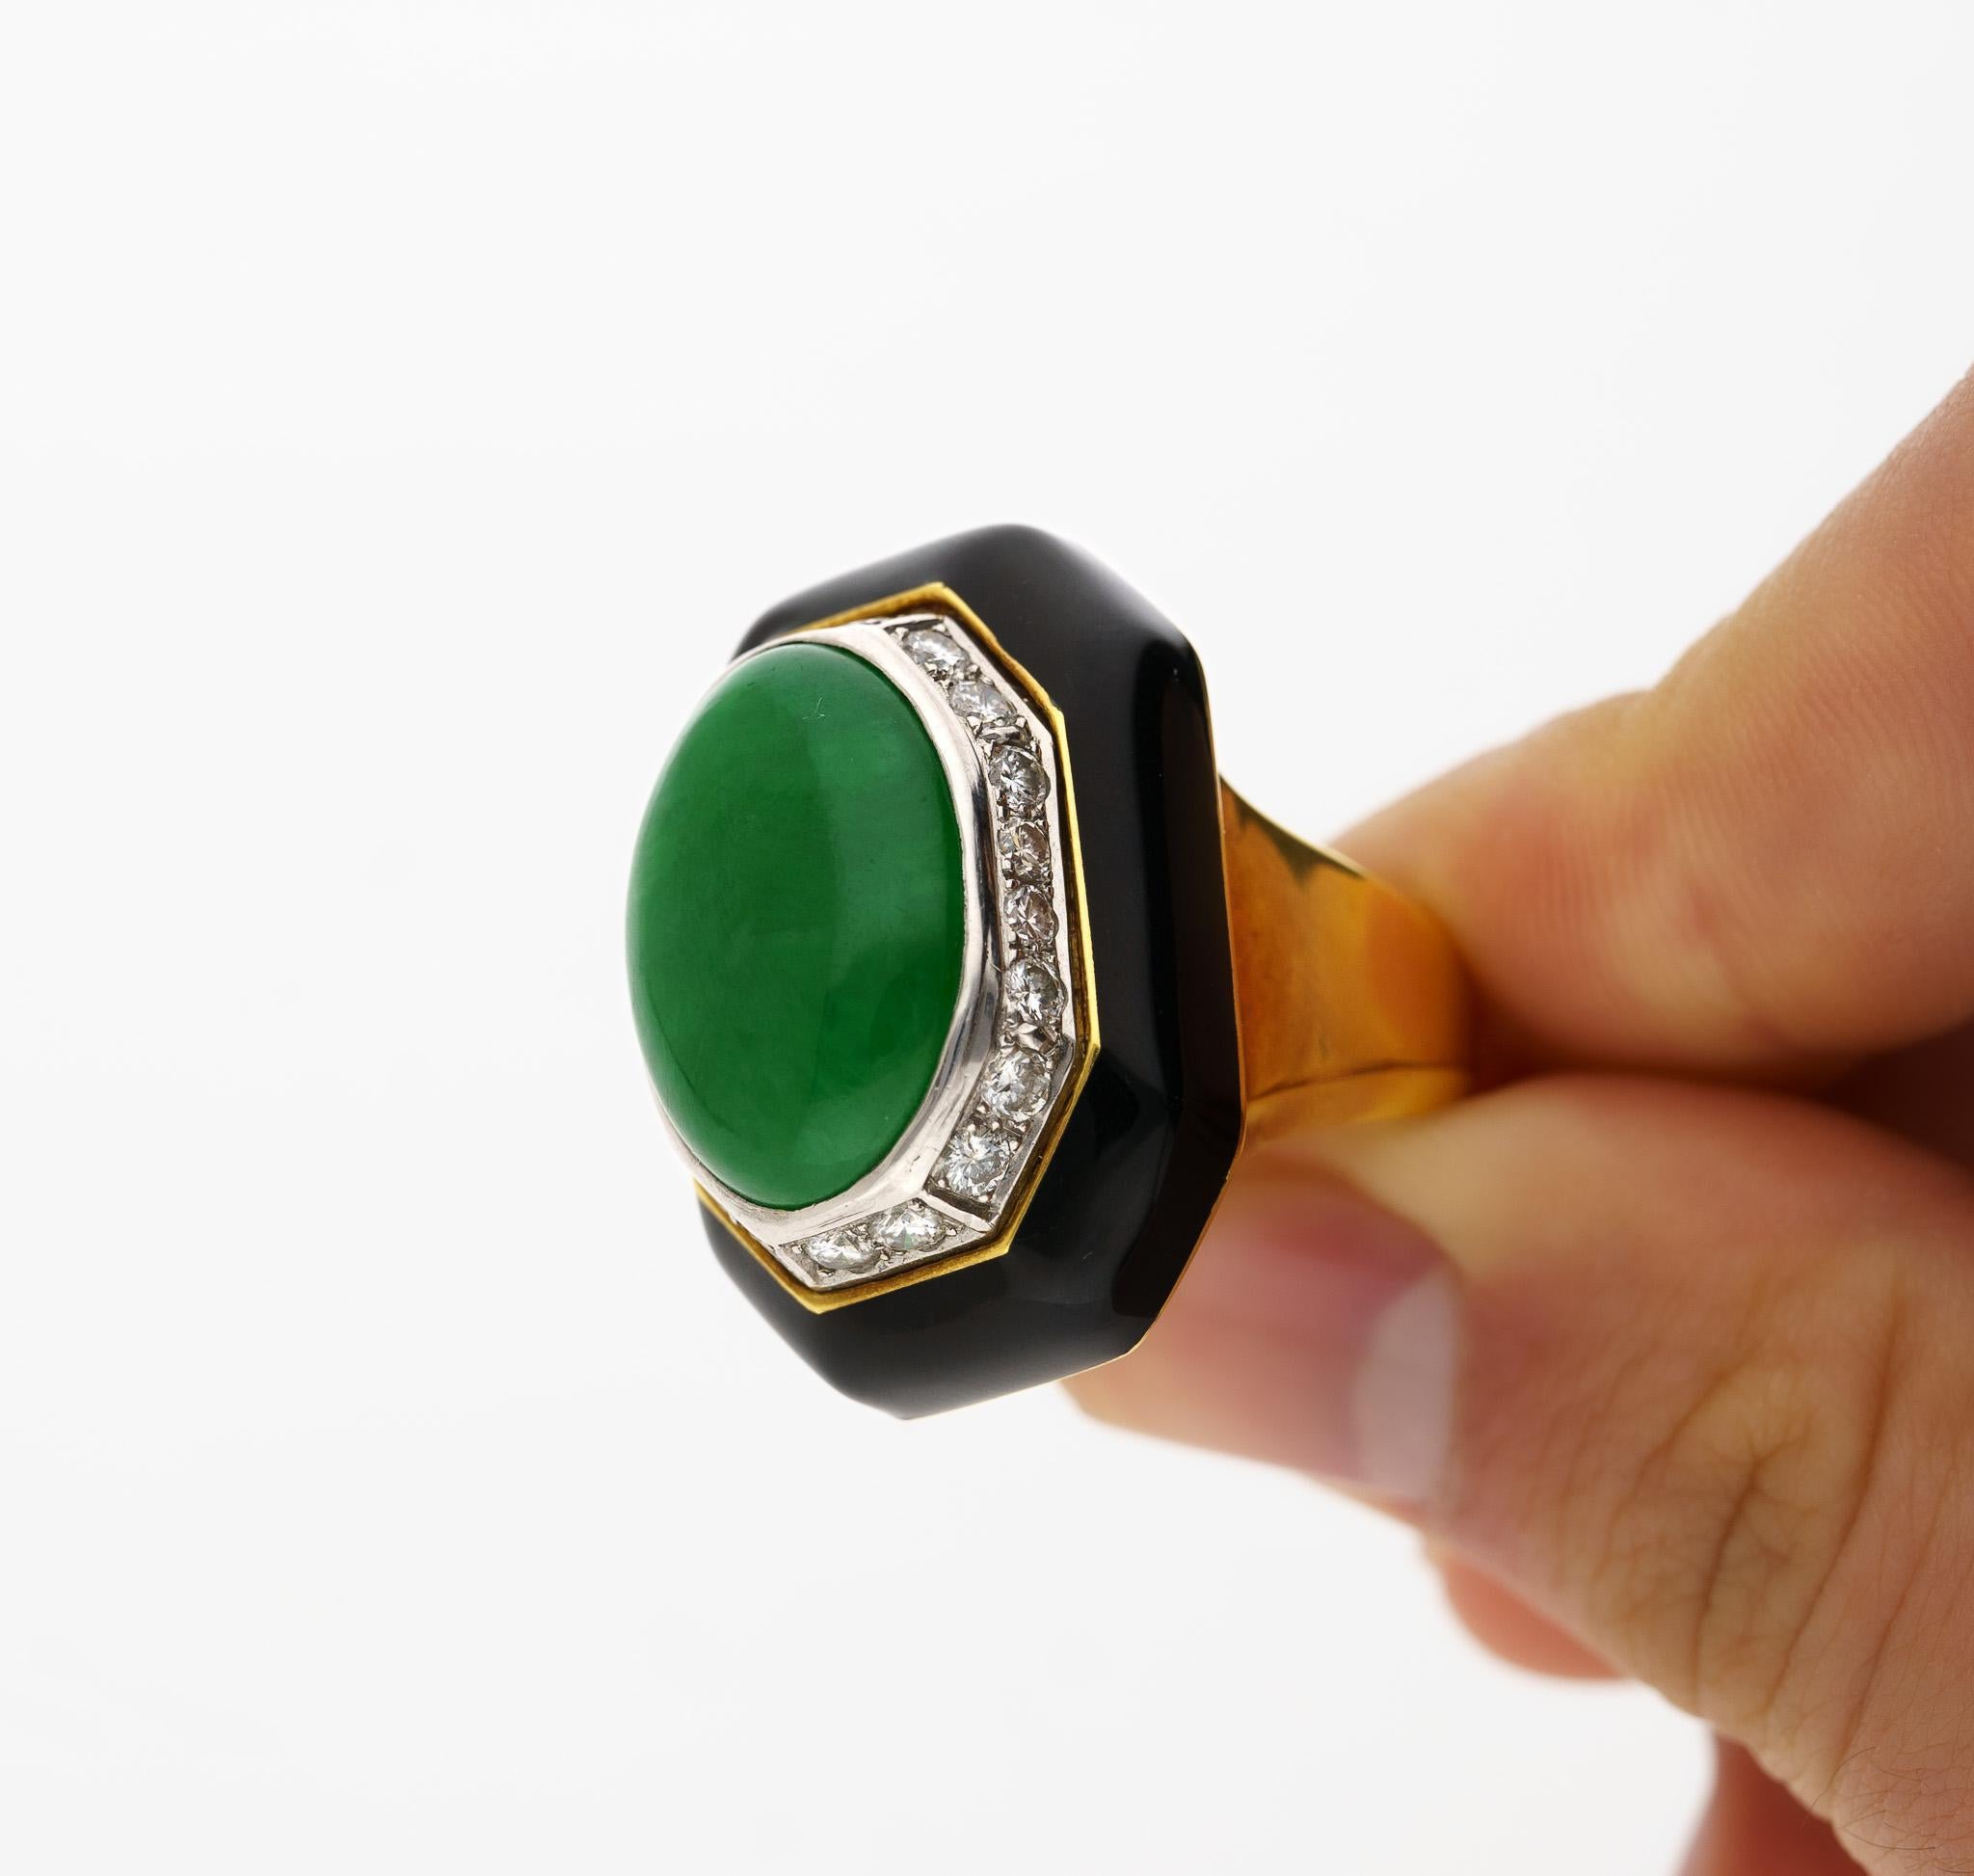 Taille cabochon David Webb Signed Type A Fei Chui Jadeite Jade and Onyx Platinum & 18K Ring en vente